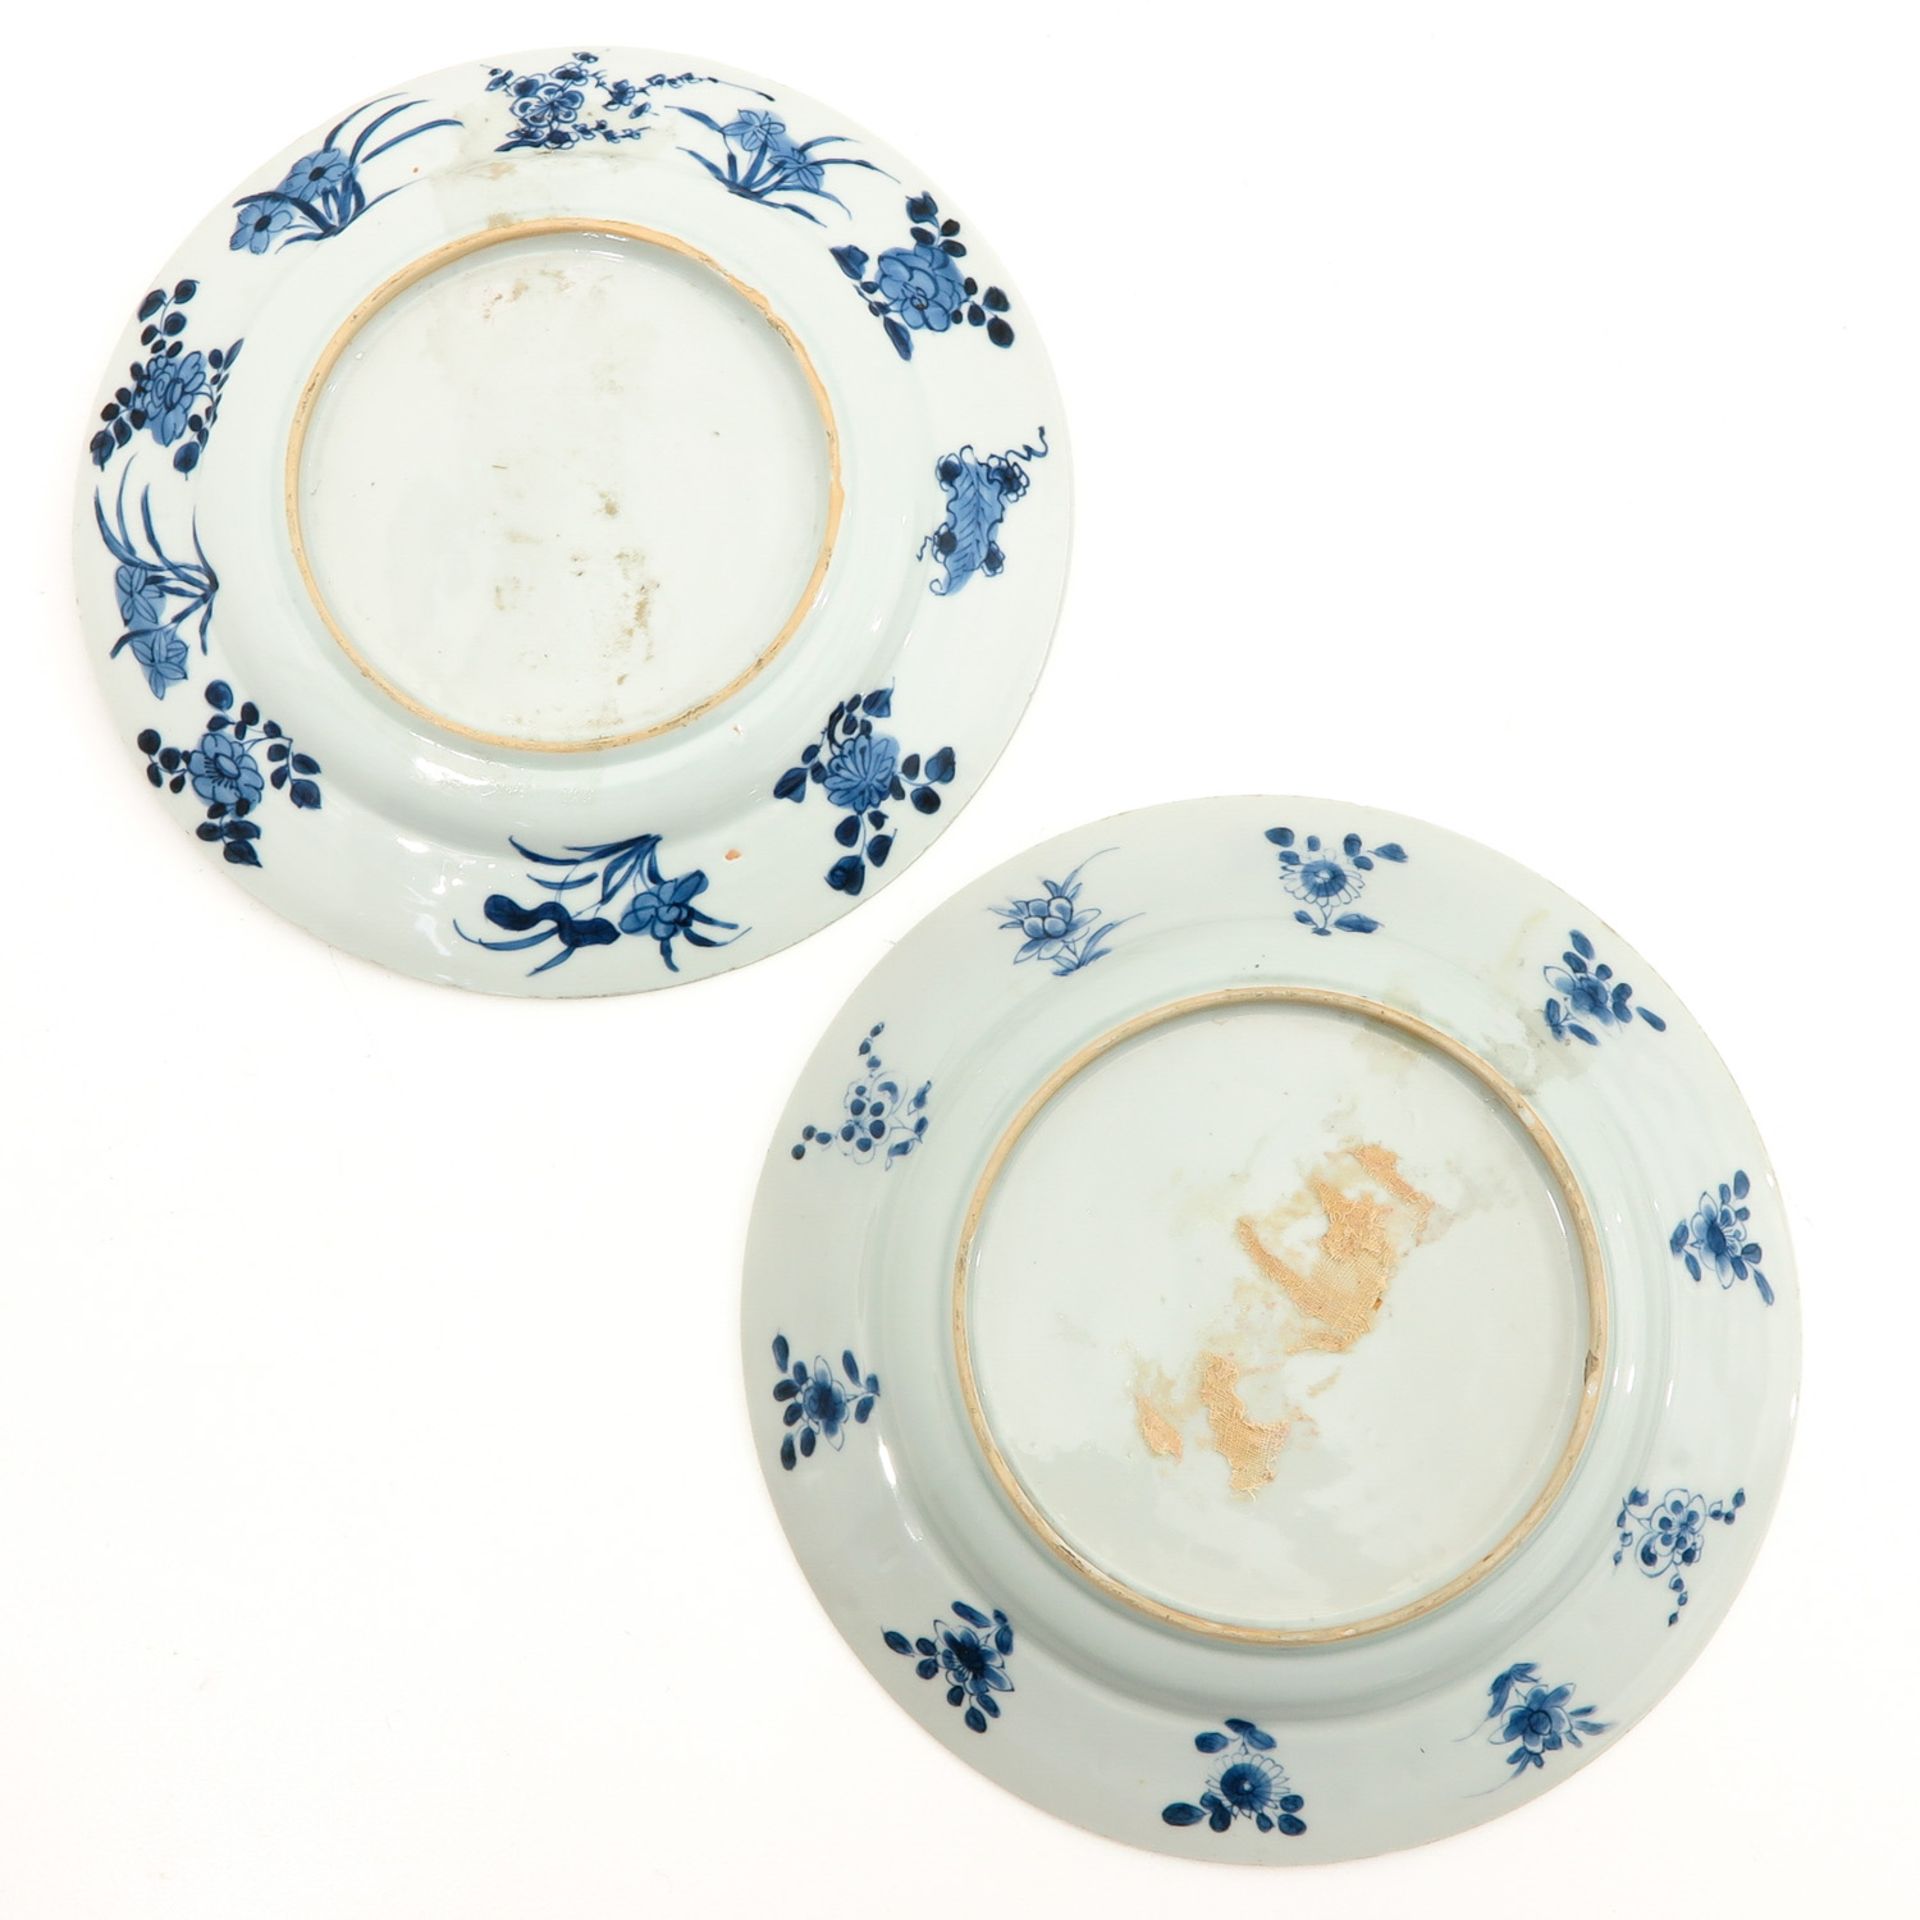 A Series of 6 Blue and White Plates - Image 4 of 10